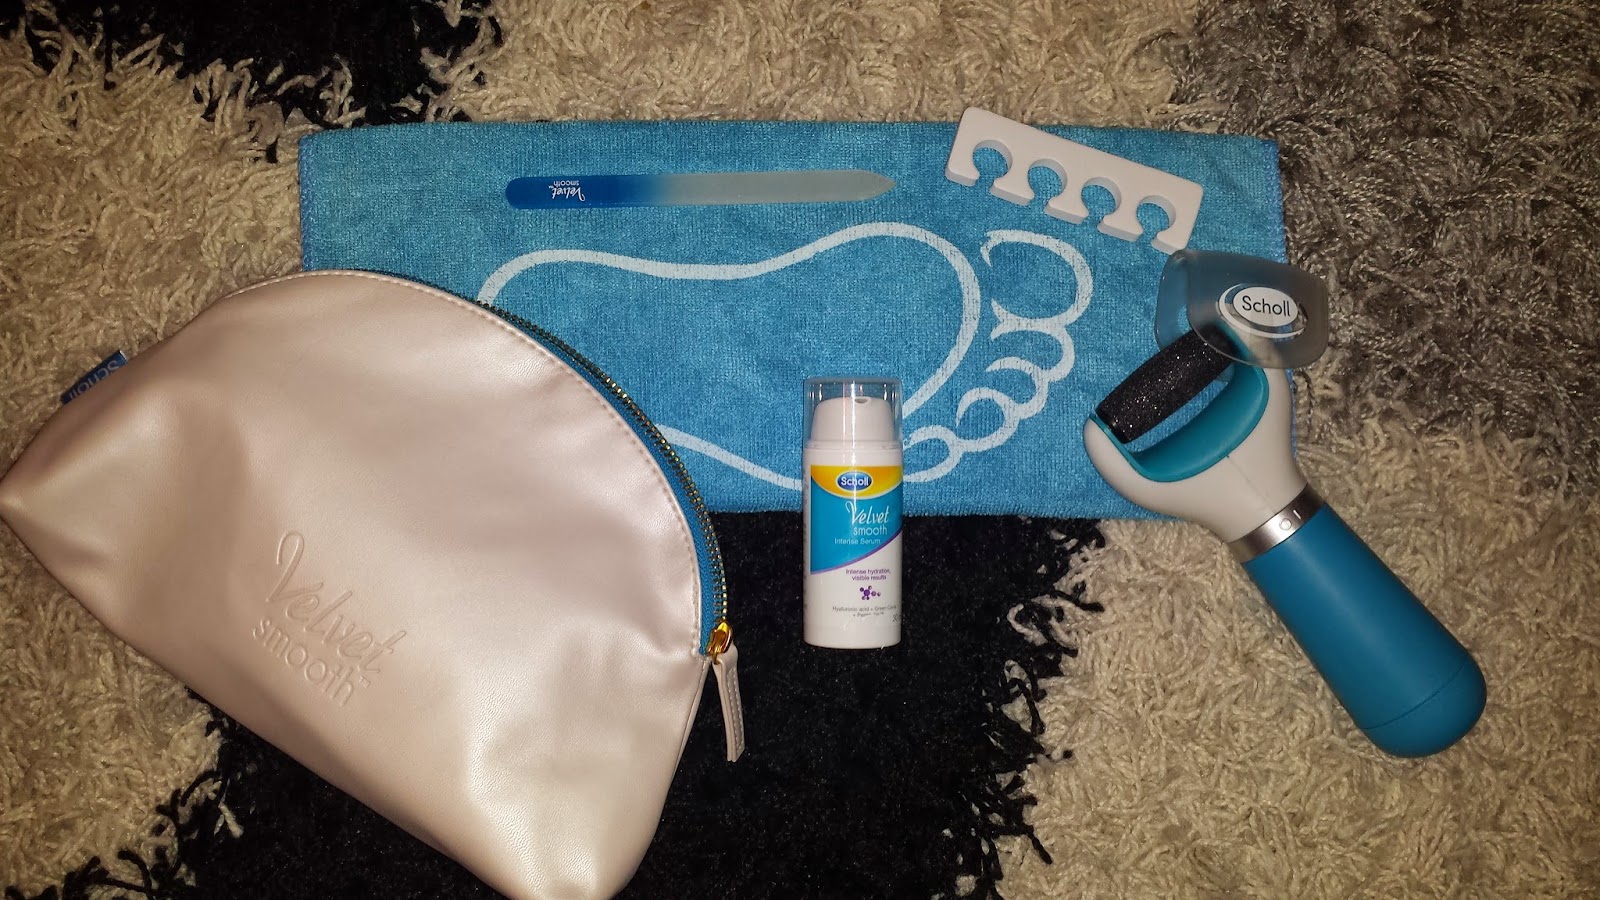 rekken barbecue Necklet Scholl Velvet Smooth Luxury Pedicure Set Review - MUMMY TO THE MAX